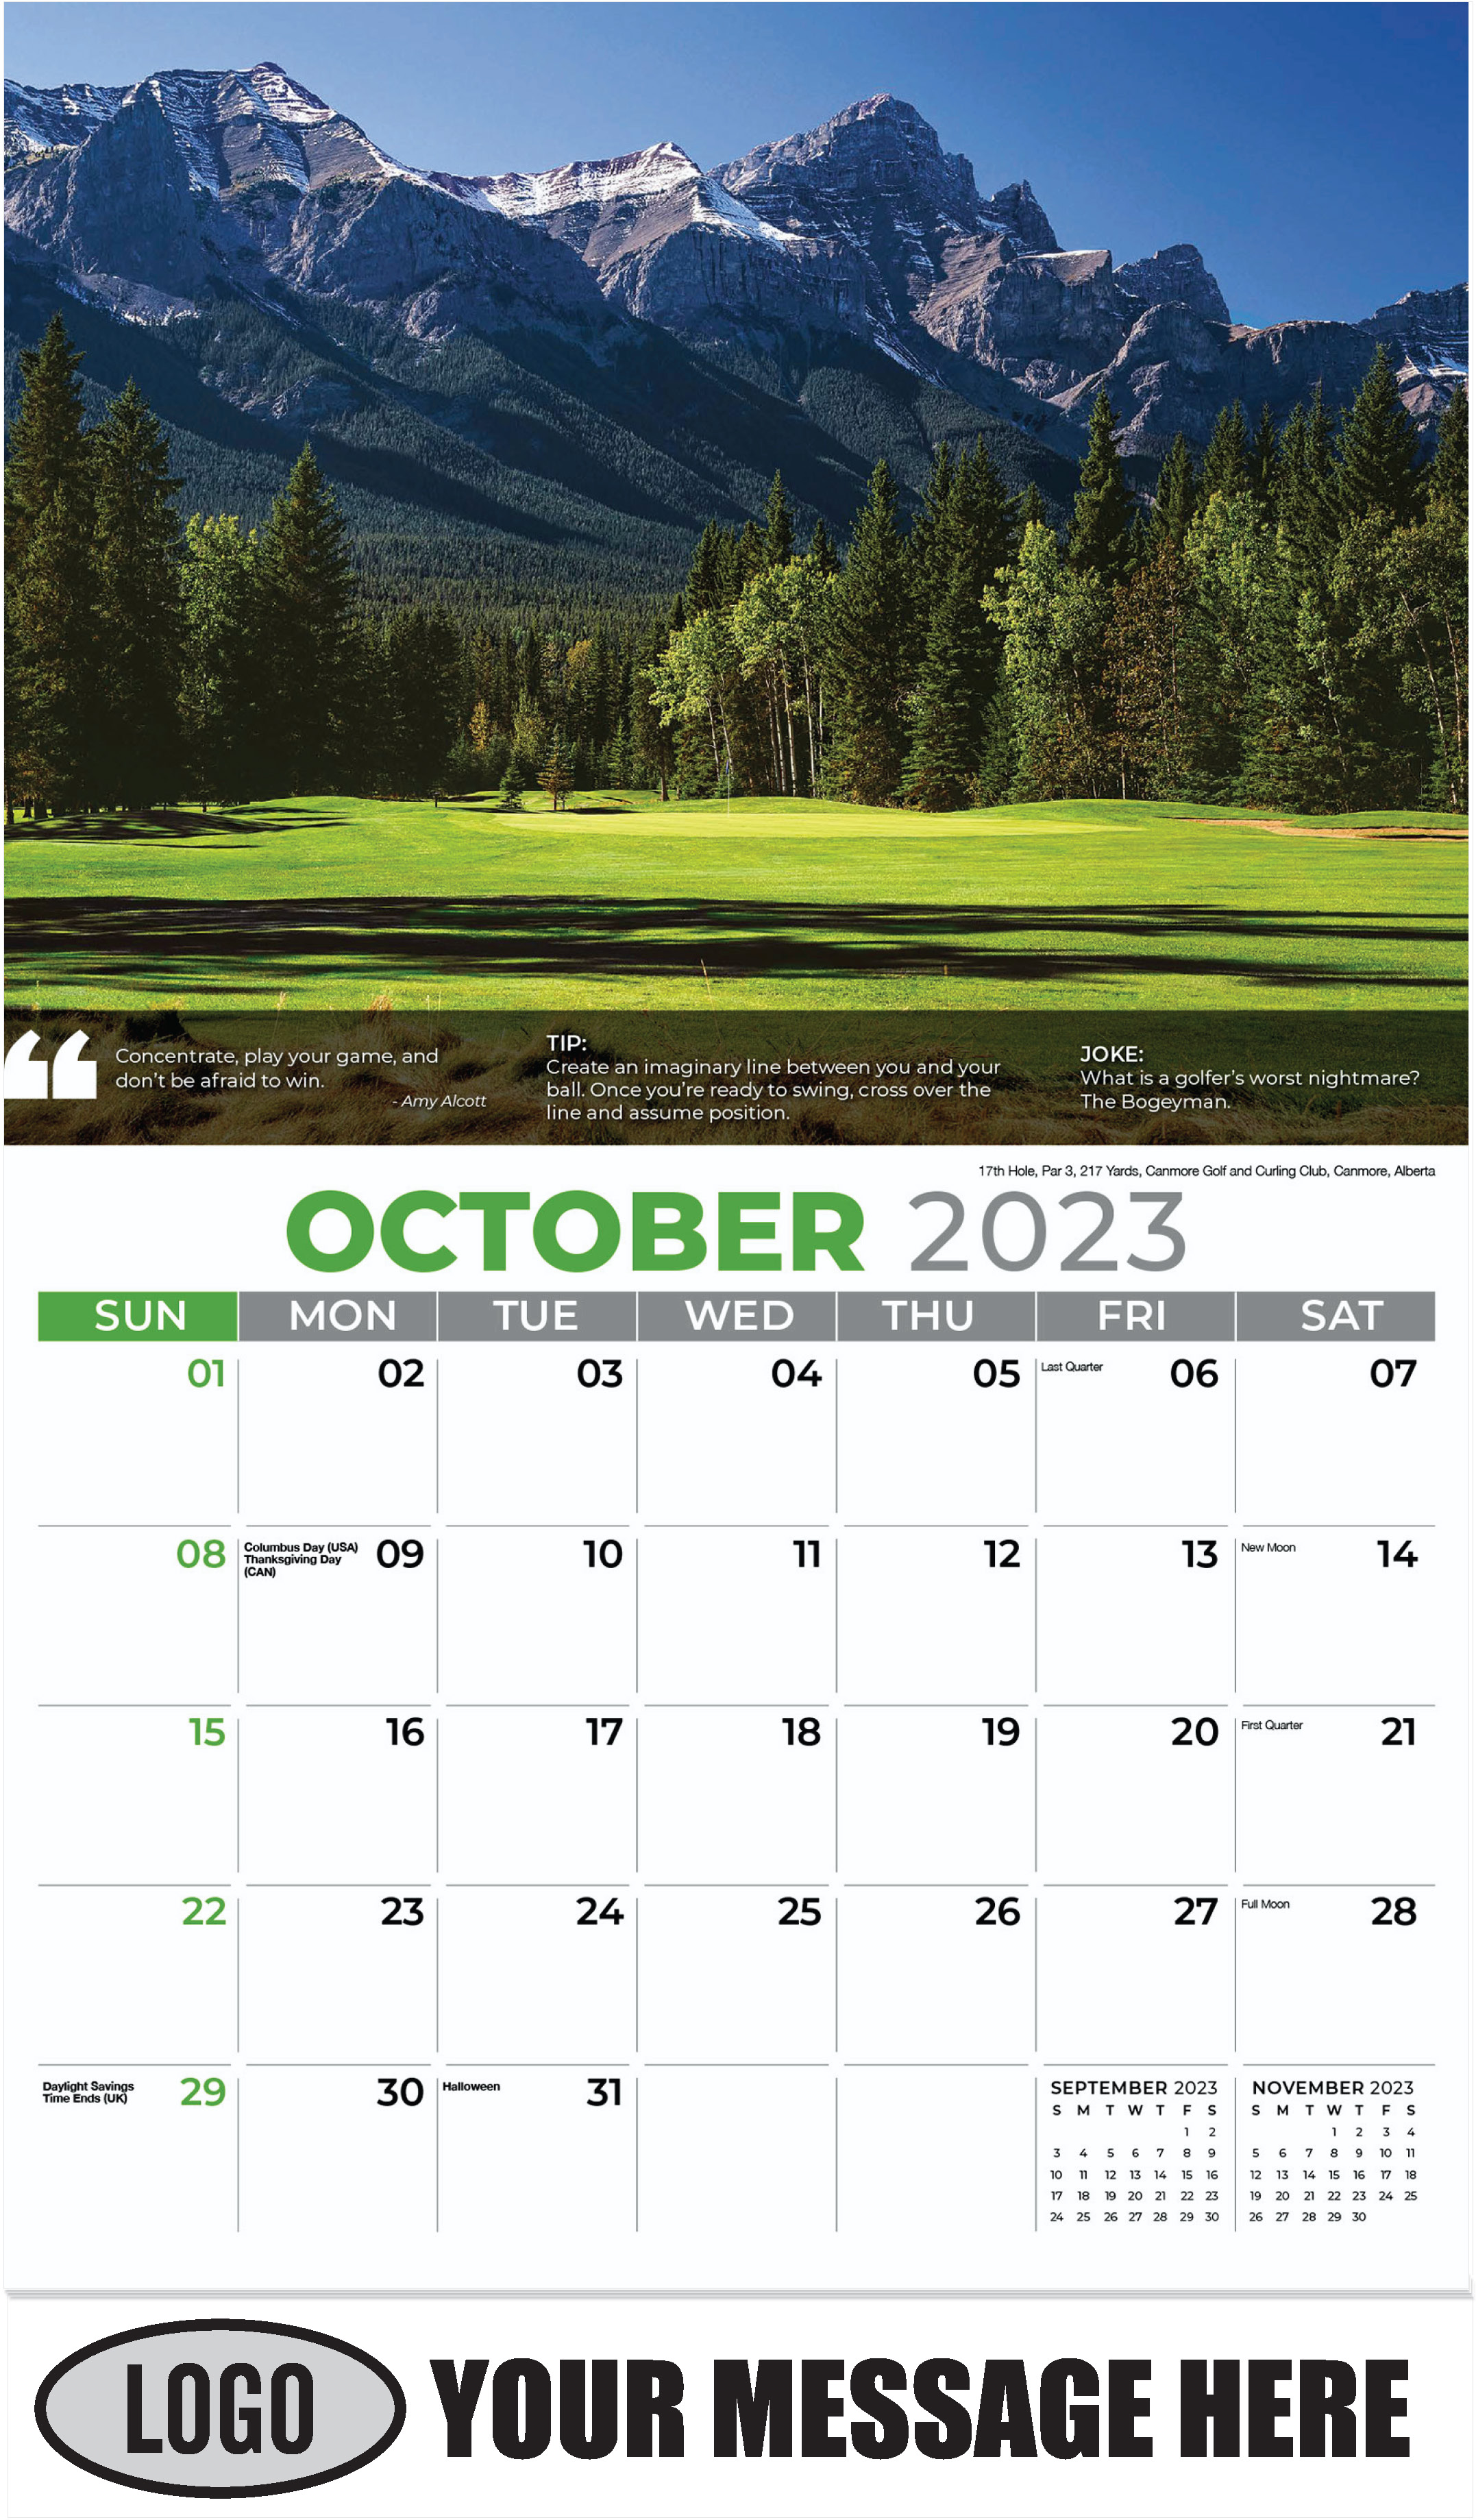 17th Hole, Par 3, 217 Yards, Canmore Golf and Curling Club, Canmore, Alberta - October - Golf Tips  (Tips, Quips and Holes) 2023 Promotional Calendar